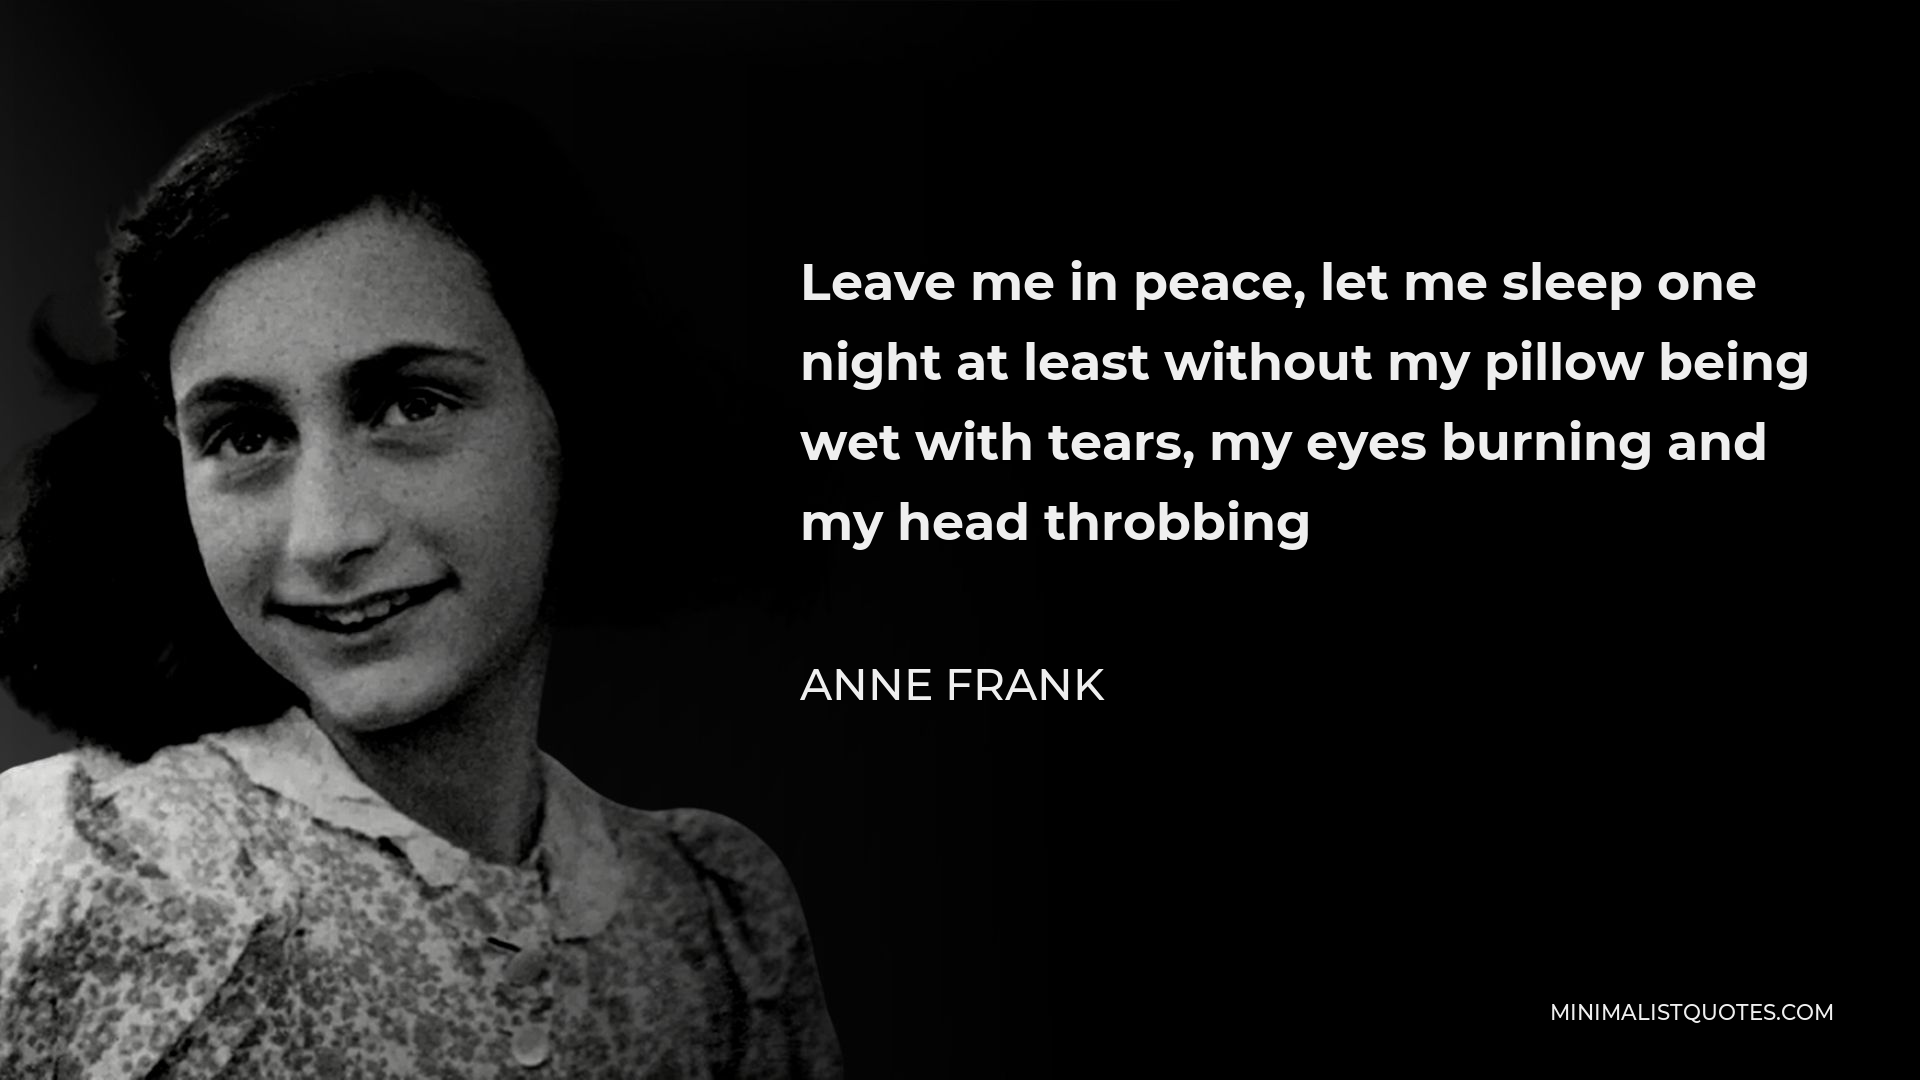 Anne Frank Quote - Leave me in peace, let me sleep one night at least without my pillow being wet with tears, my eyes burning and my head throbbing